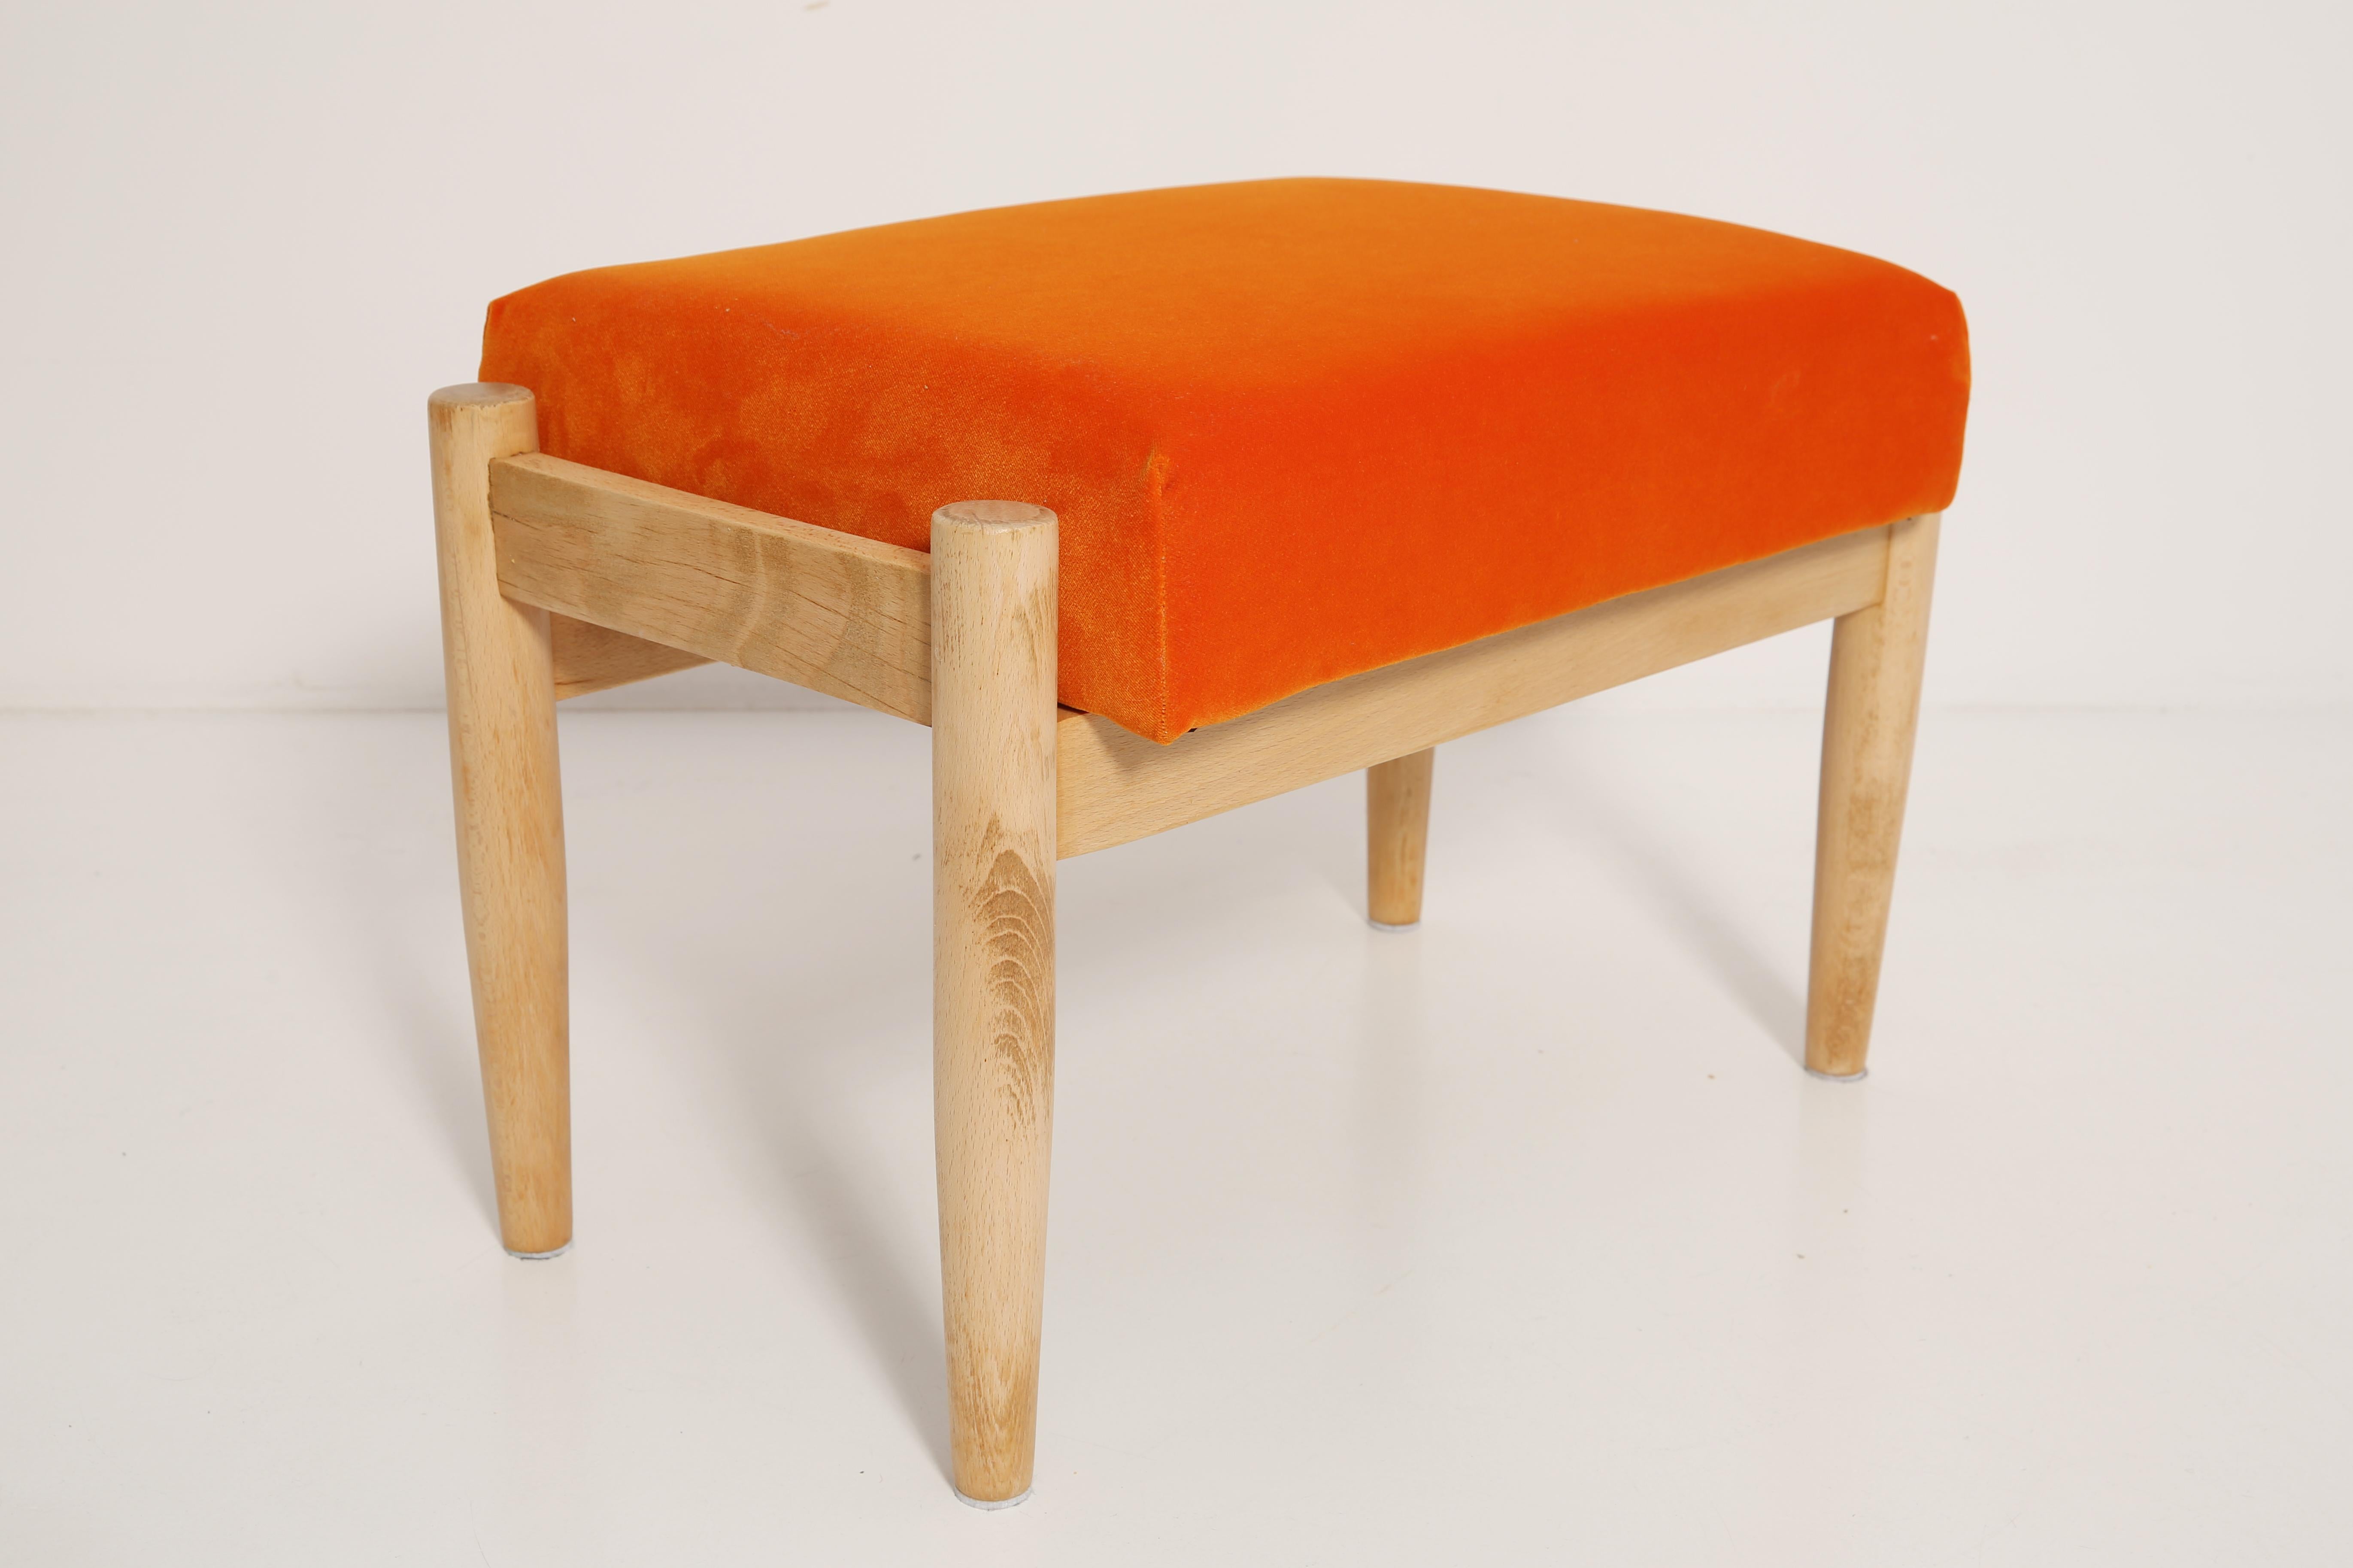 Stools from the turn of the 1960s. Beautiful bright orange high quality velvet upholstery. The stools consists of an upholstered part, a seat and wooden legs narrowing downwards, characteristic of the 1960s style. We can prepare this set also in